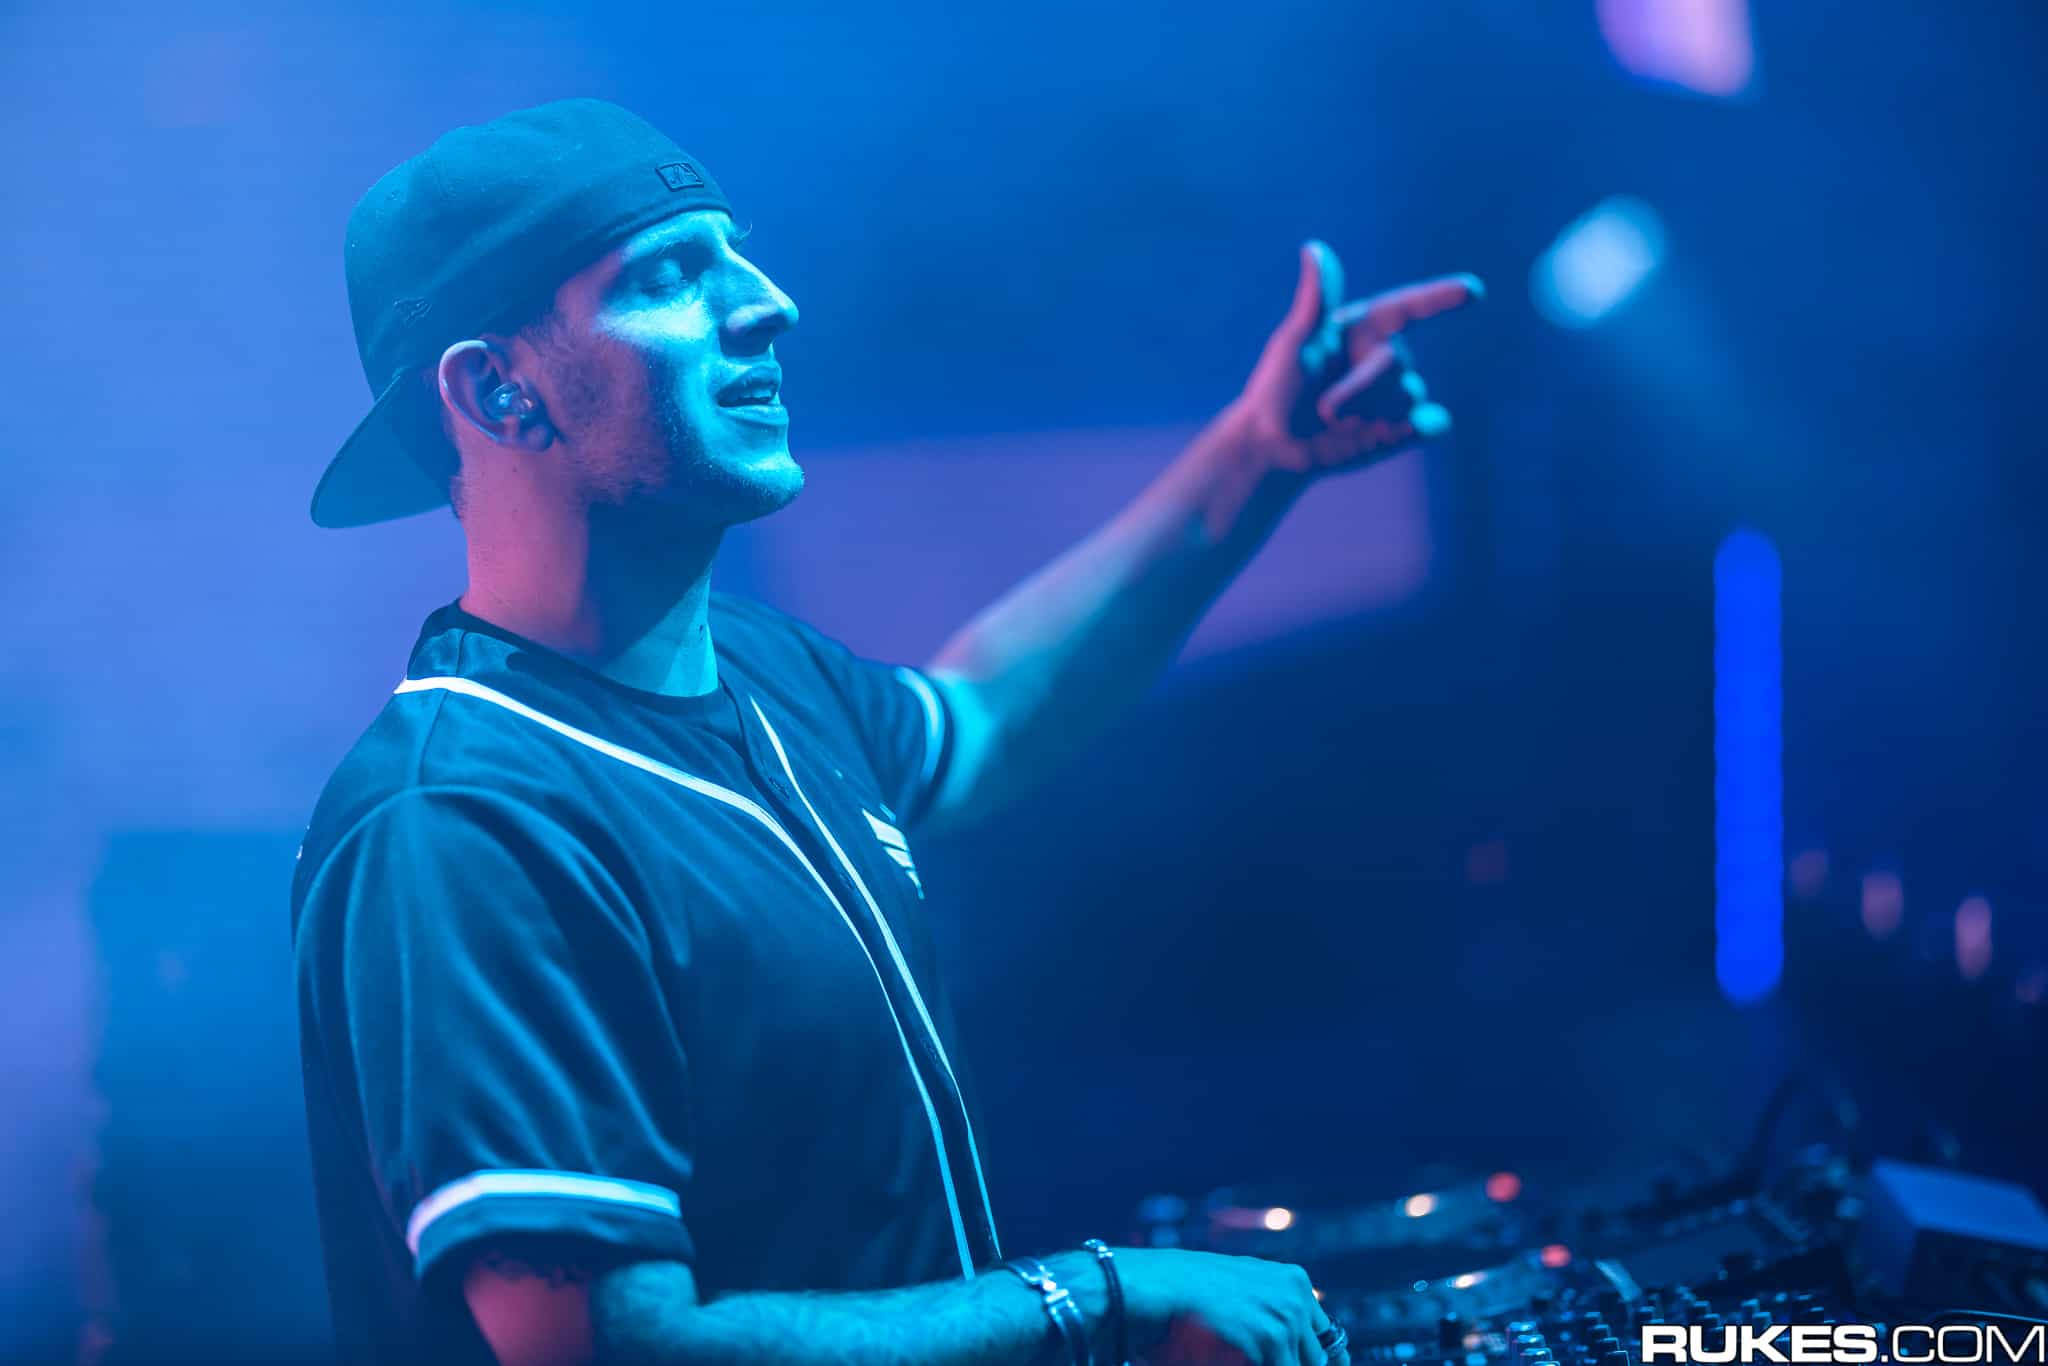 ILLENIUM and Dabin unveil dystopian video for 'Hearts On Fire' and announce official remixes: Watch